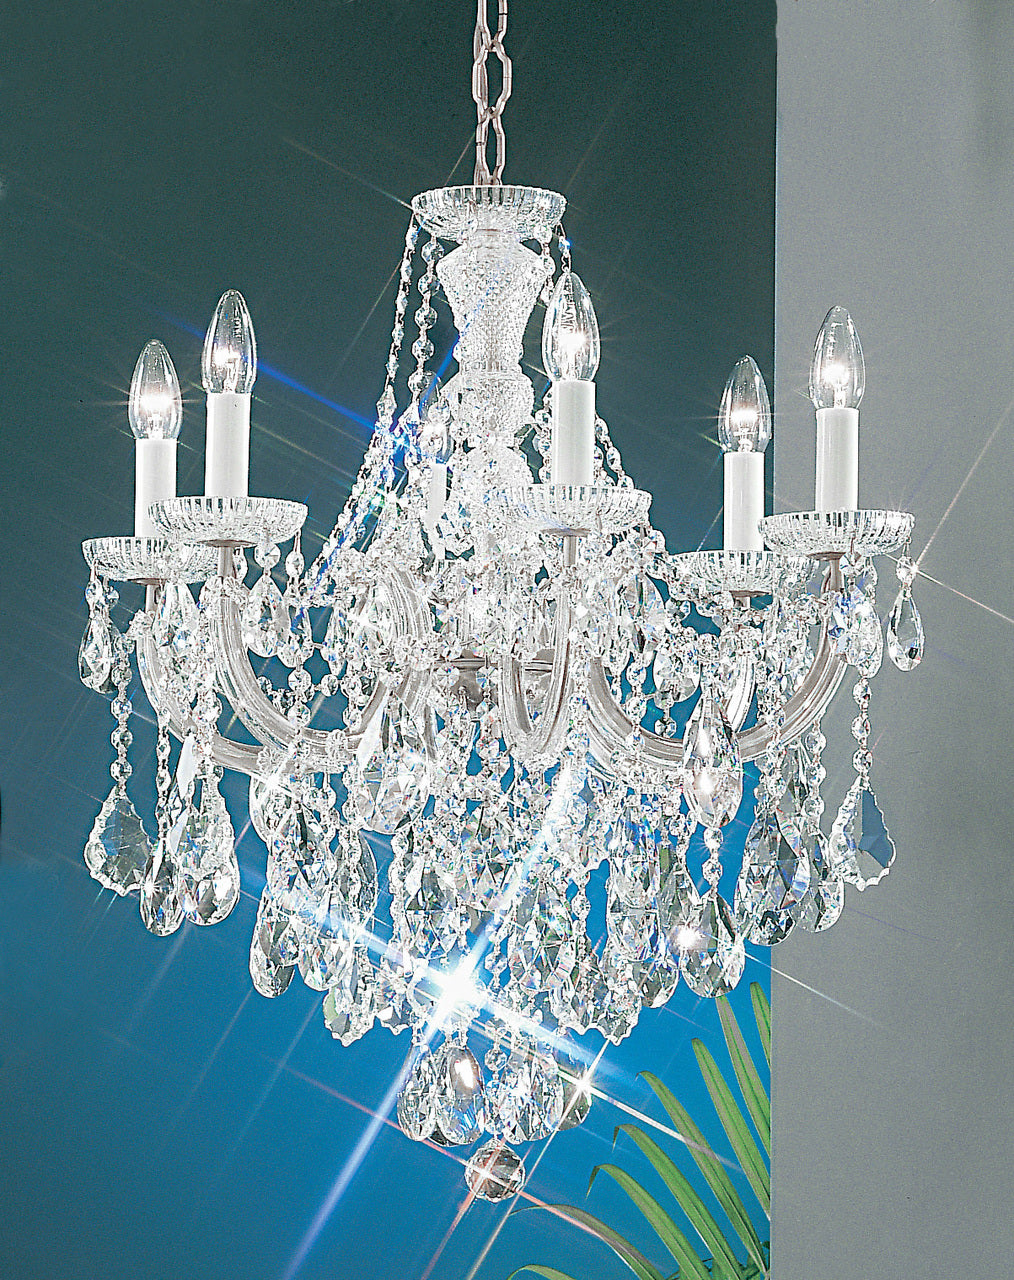 Classic Lighting 8121 CH C Maria Theresa Traditional Crystal Chandelier in Chrome (Imported from Italy)